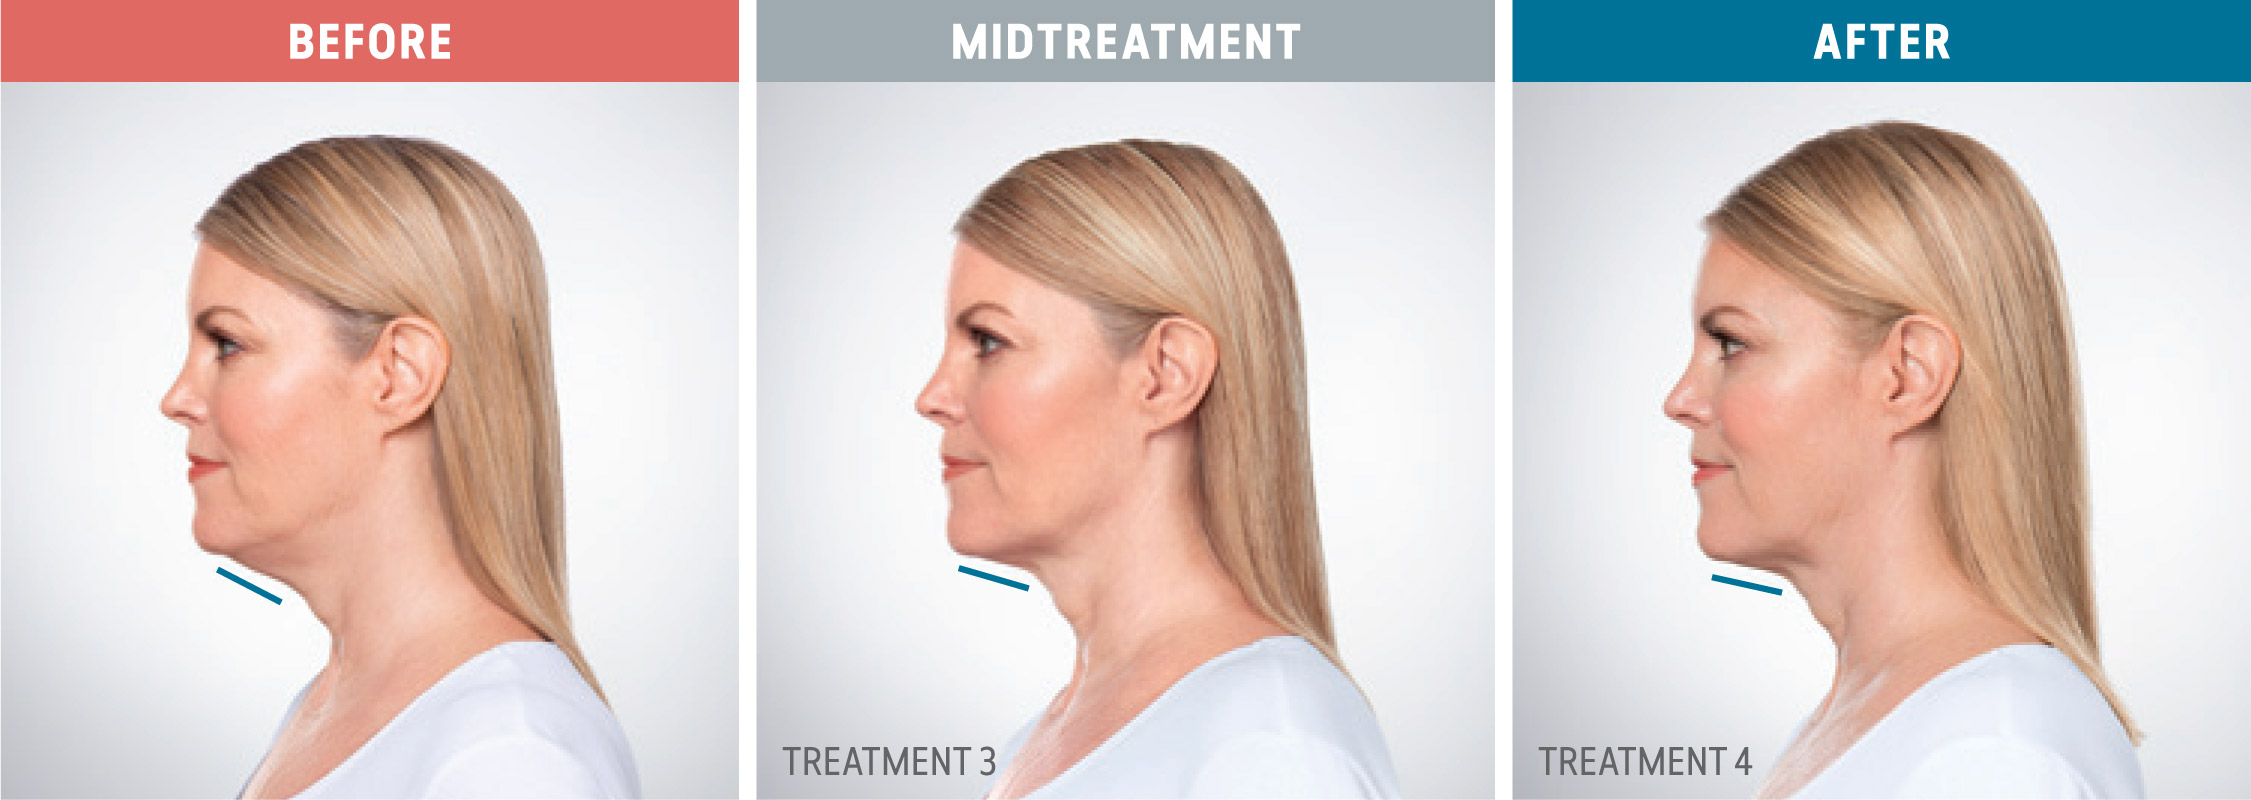 Kybella before, midtreatment, and after photos